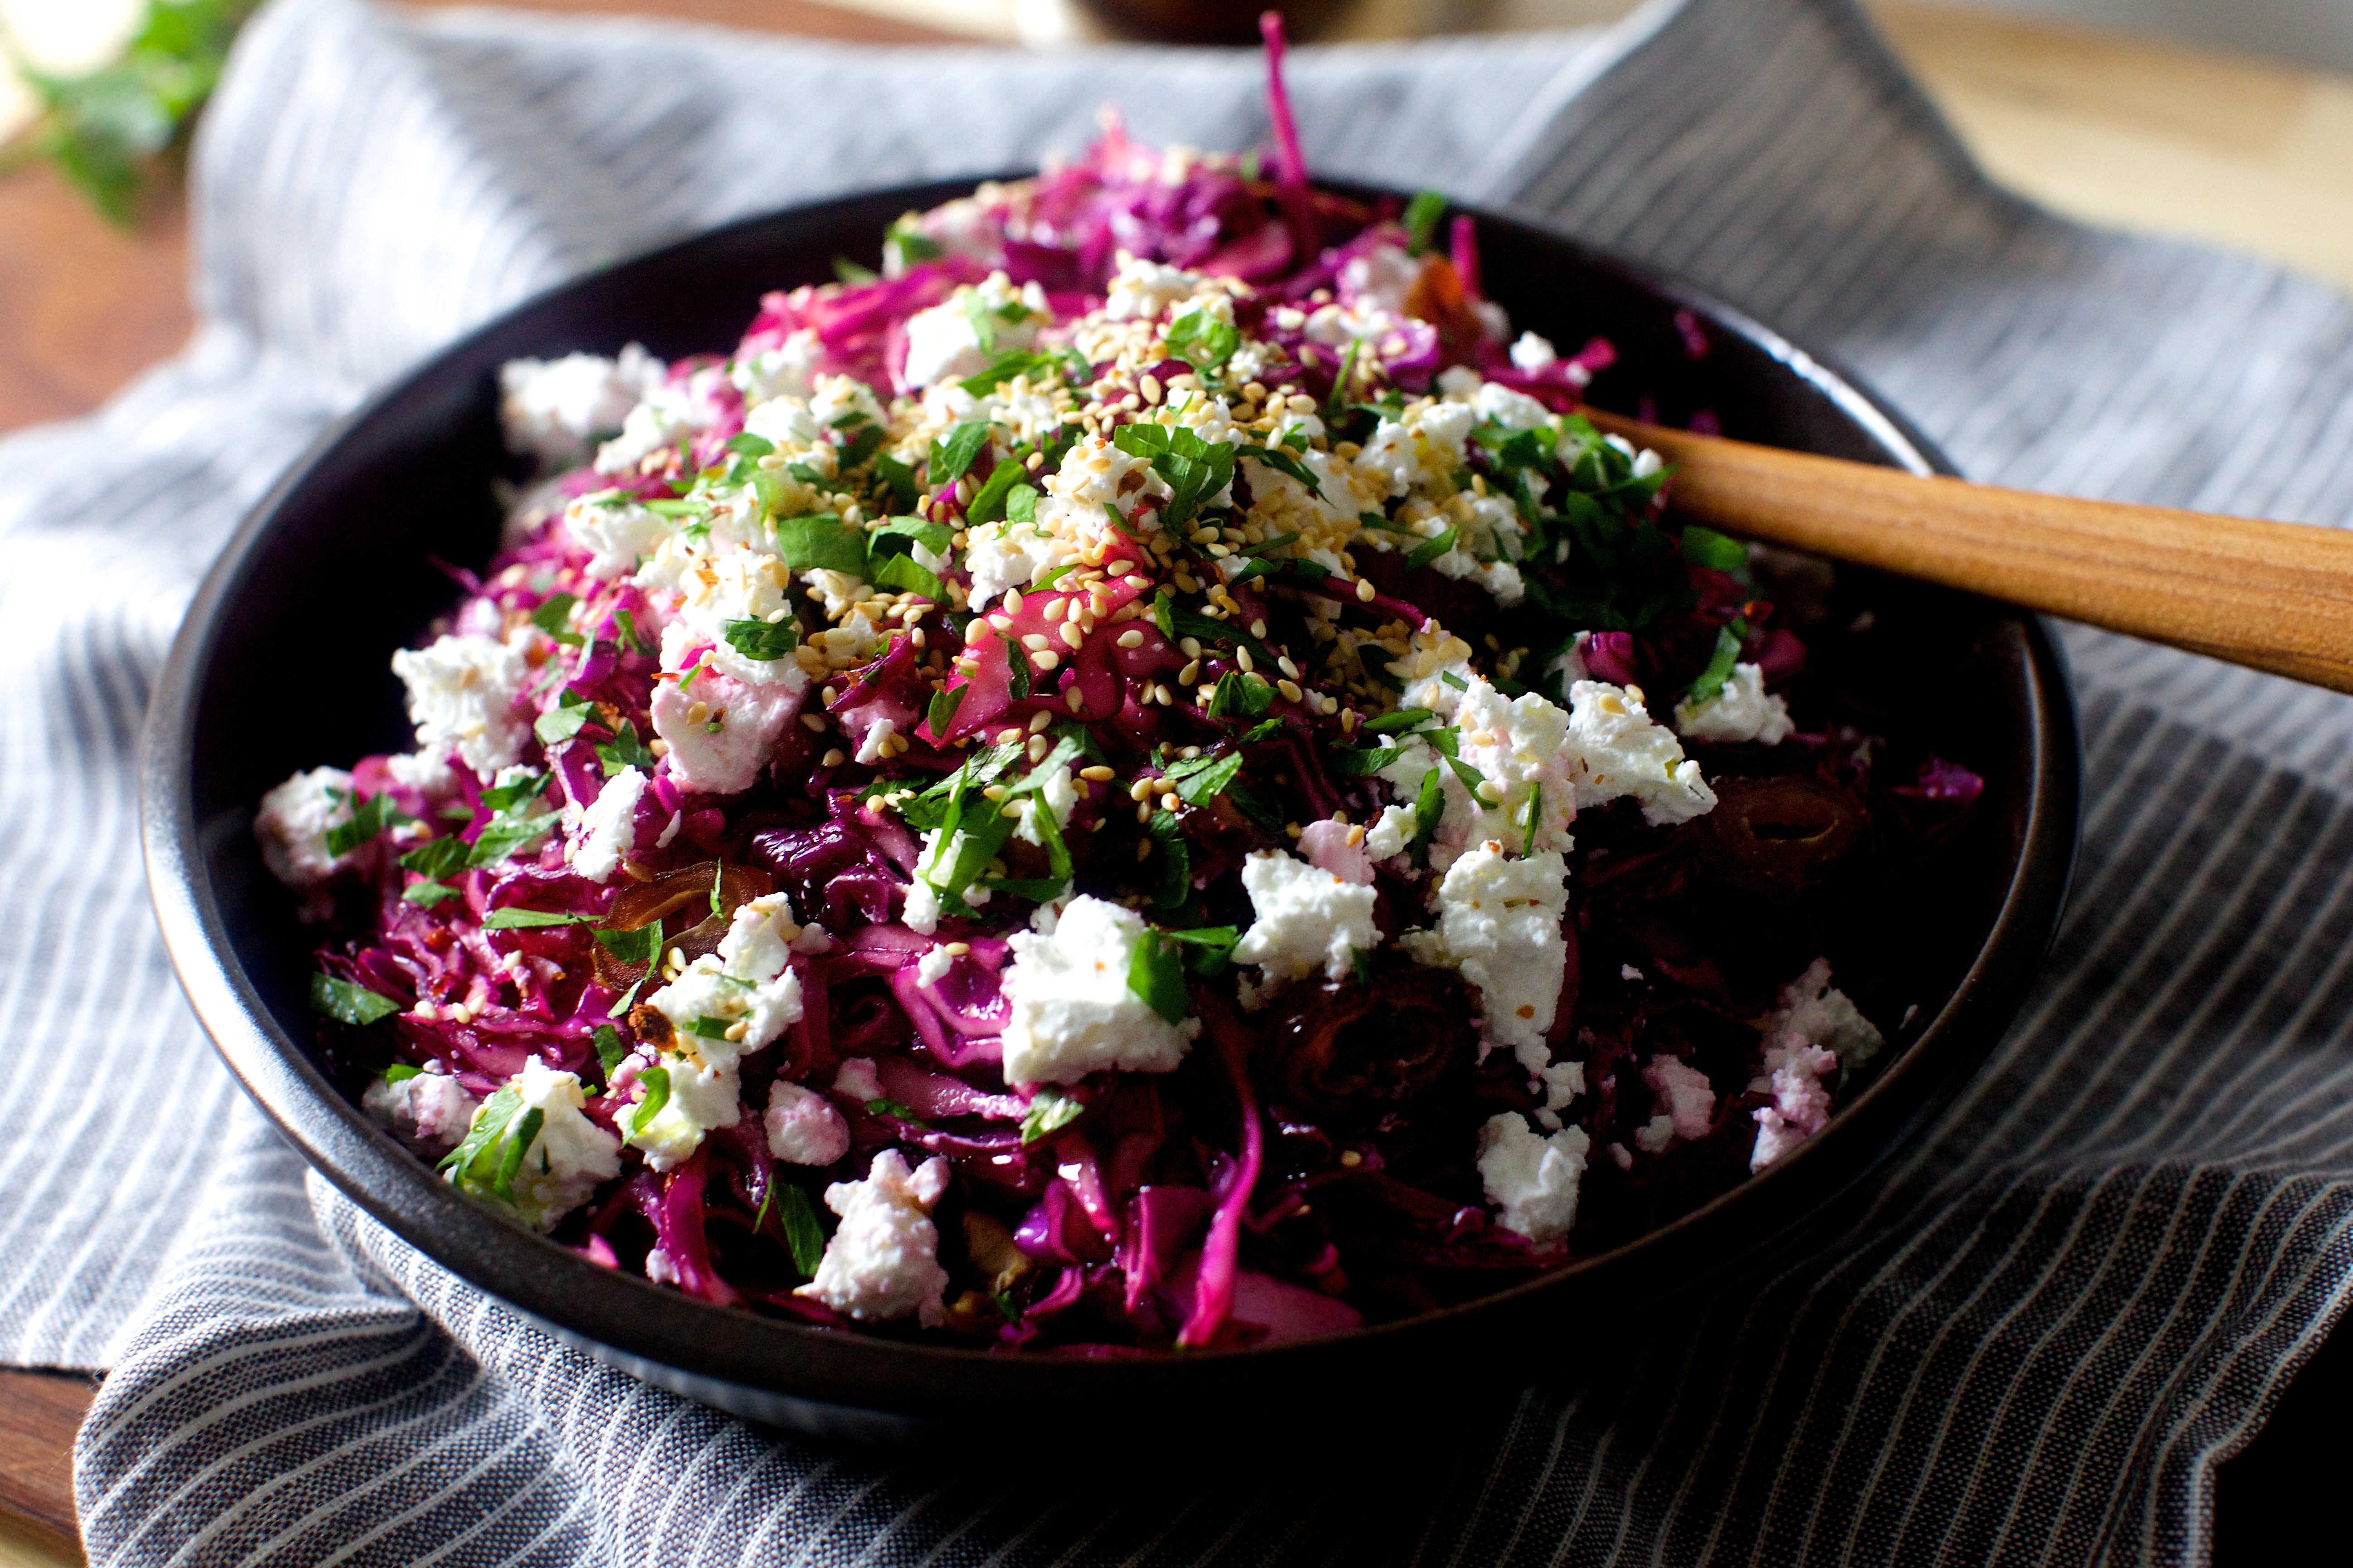 Date-feta-and-red-cabbage-salad